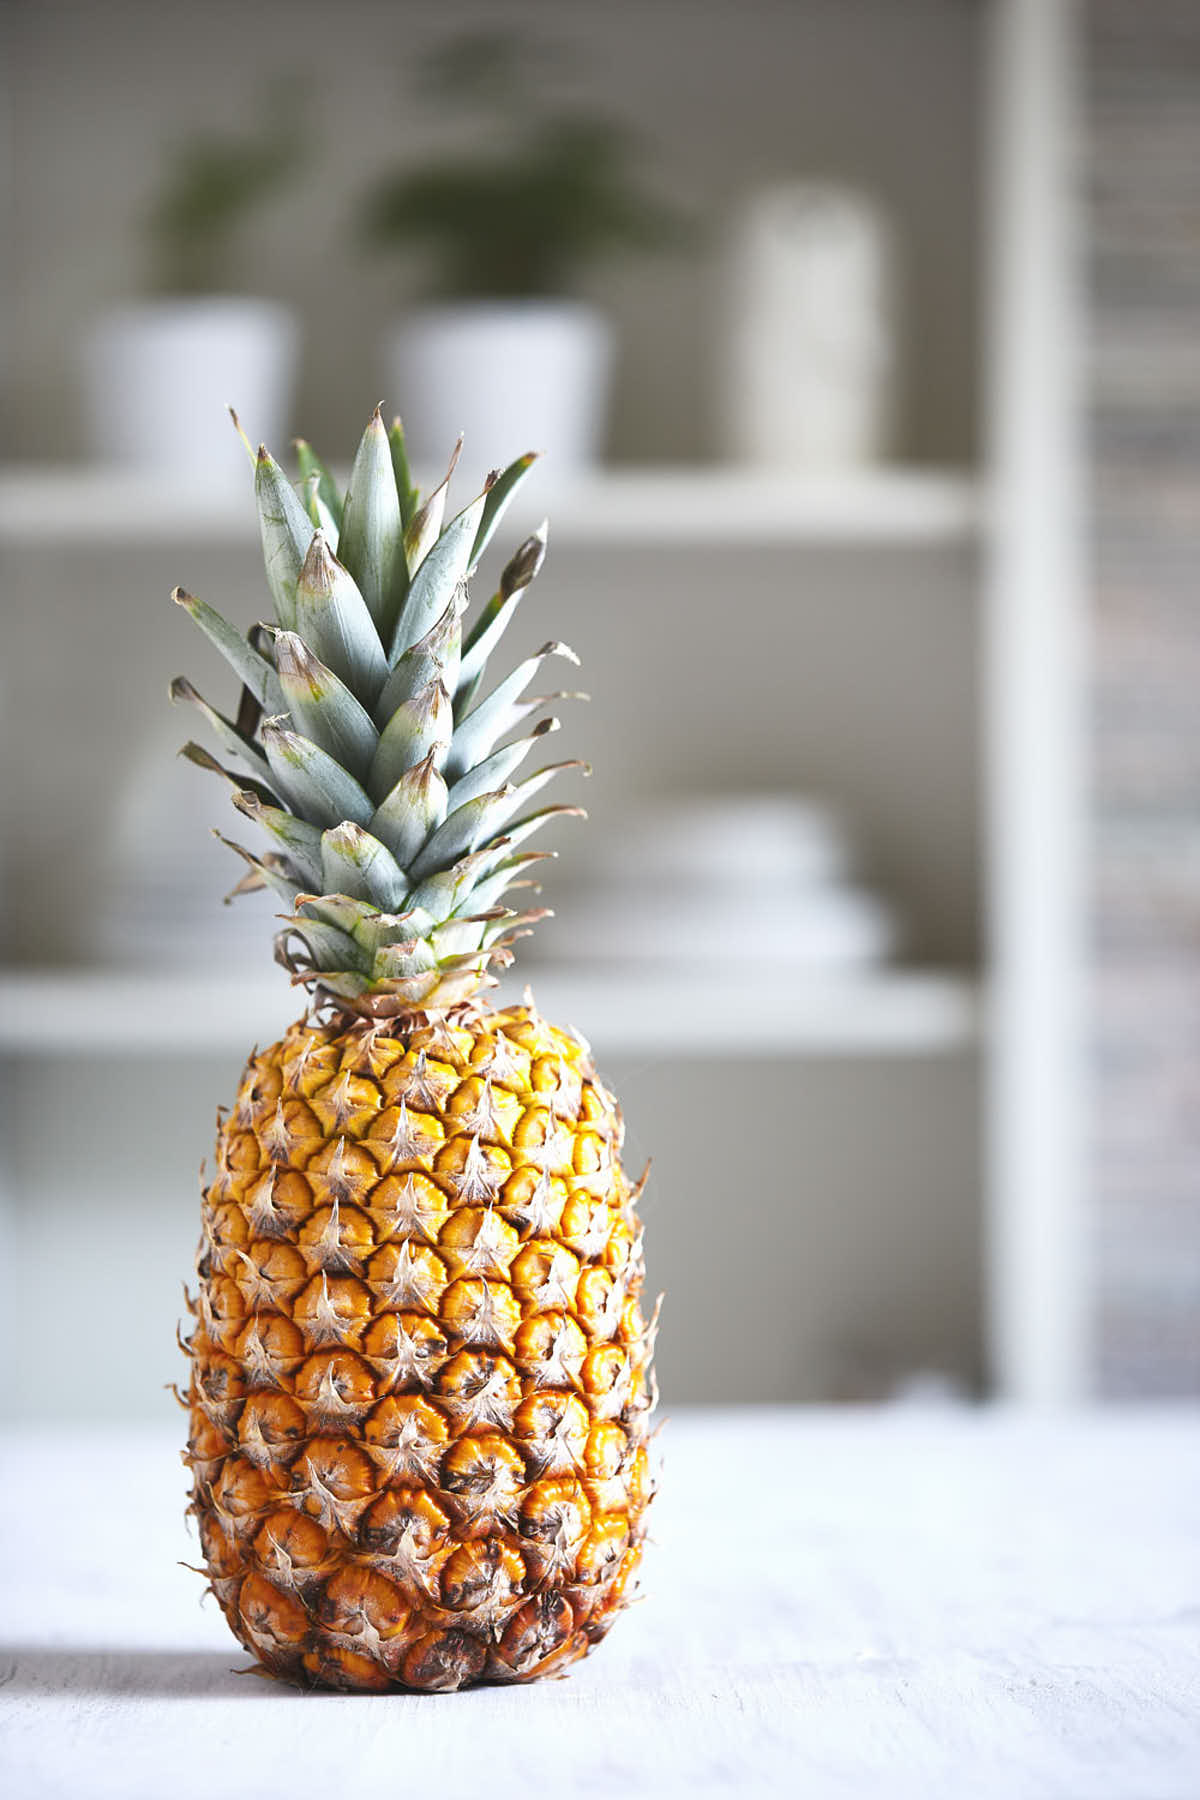 Side view of pineapple on a wooden table